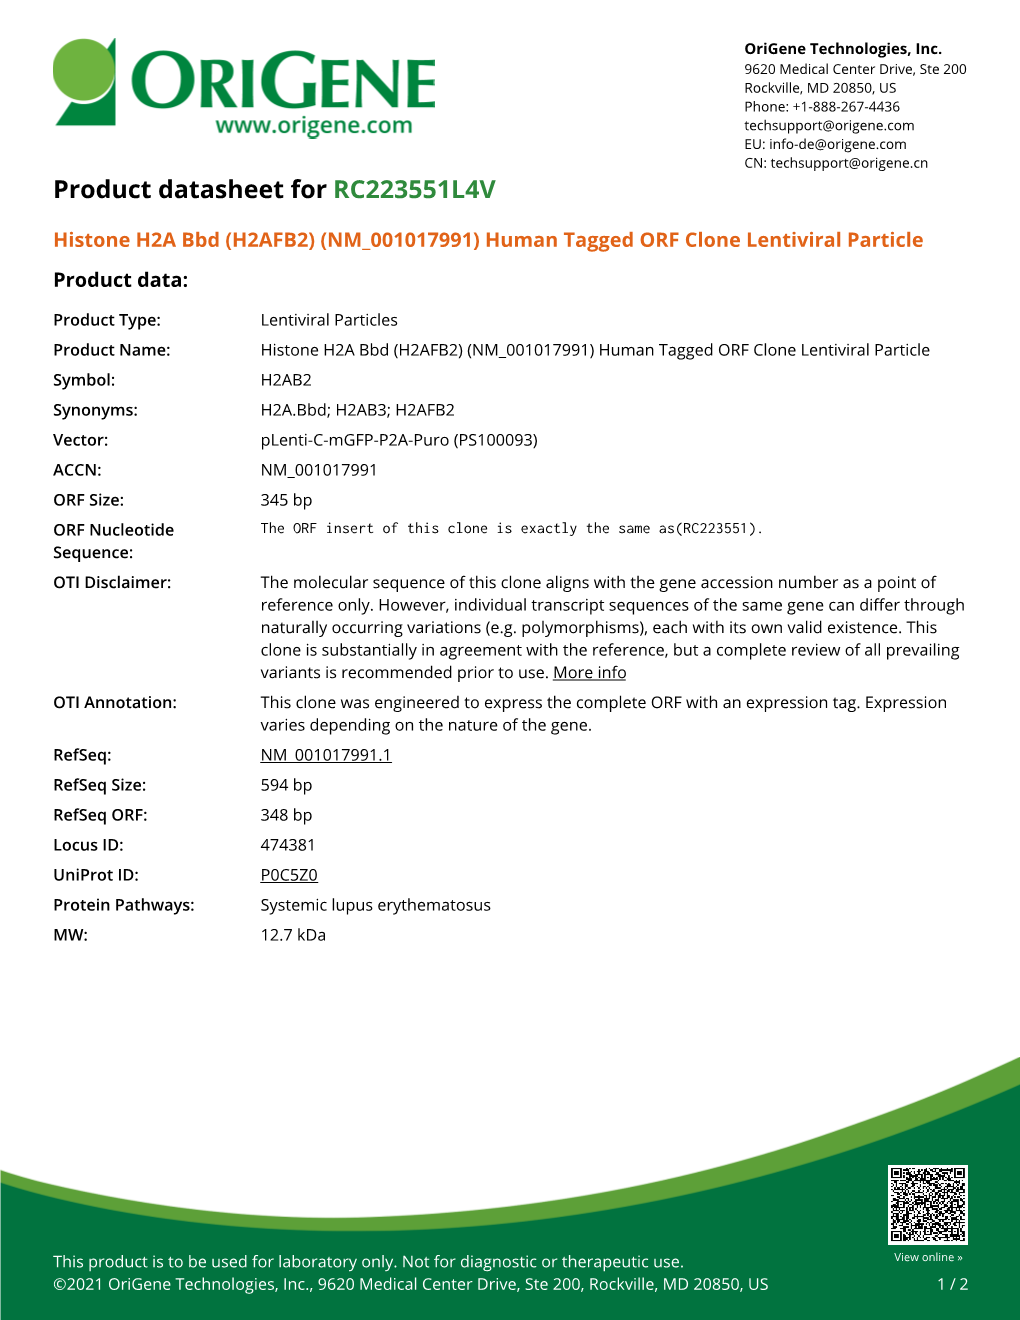 Histone H2A Bbd (H2AFB2) (NM 001017991) Human Tagged ORF Clone Lentiviral Particle Product Data